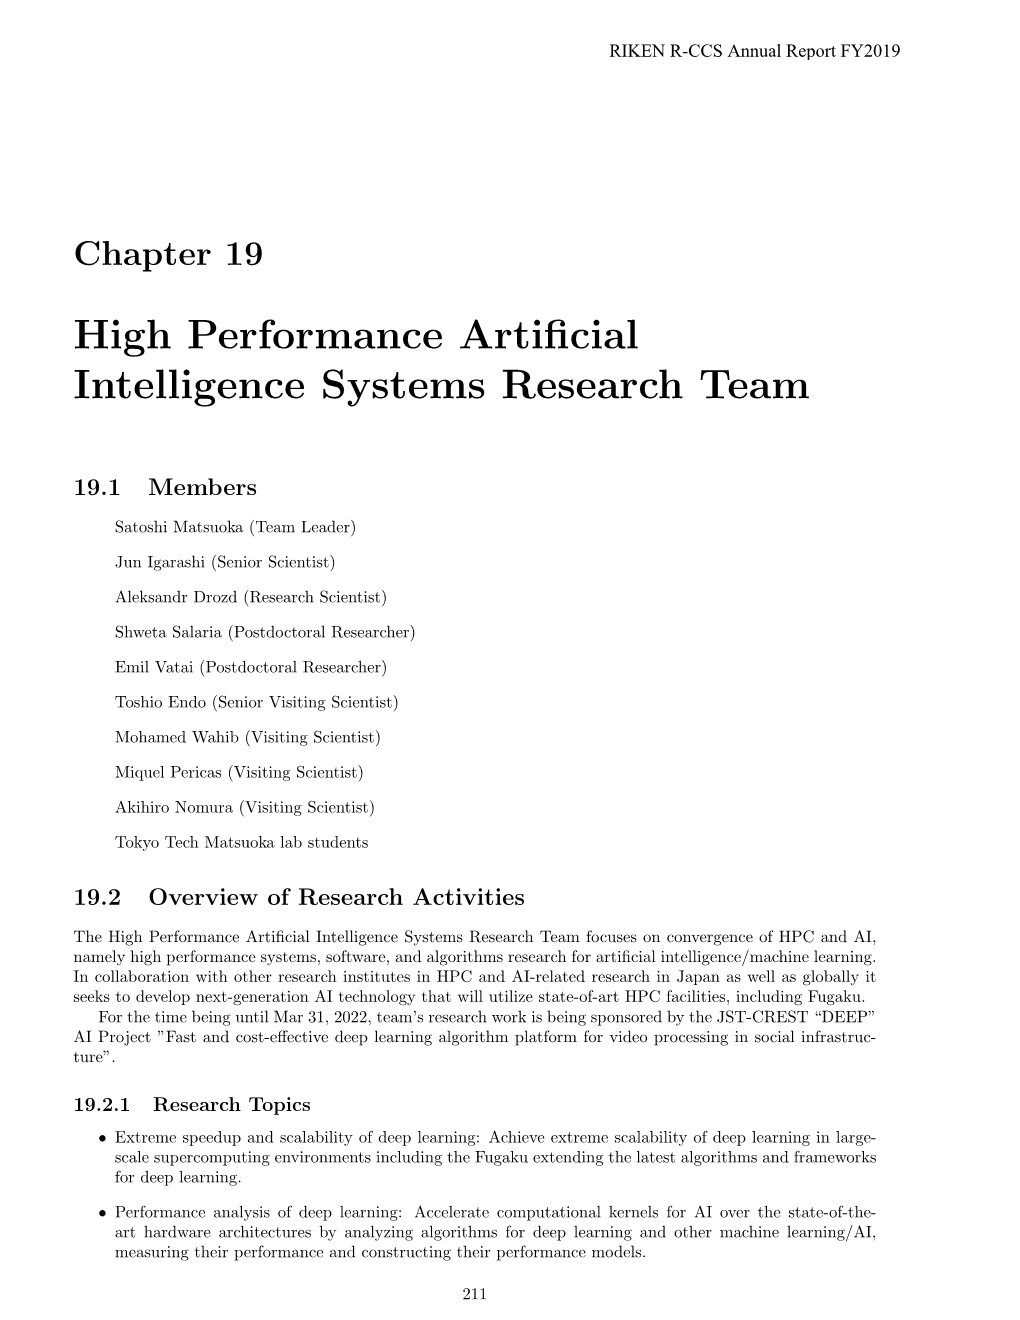 High Performance Artificial Intelligence Systems Research Team